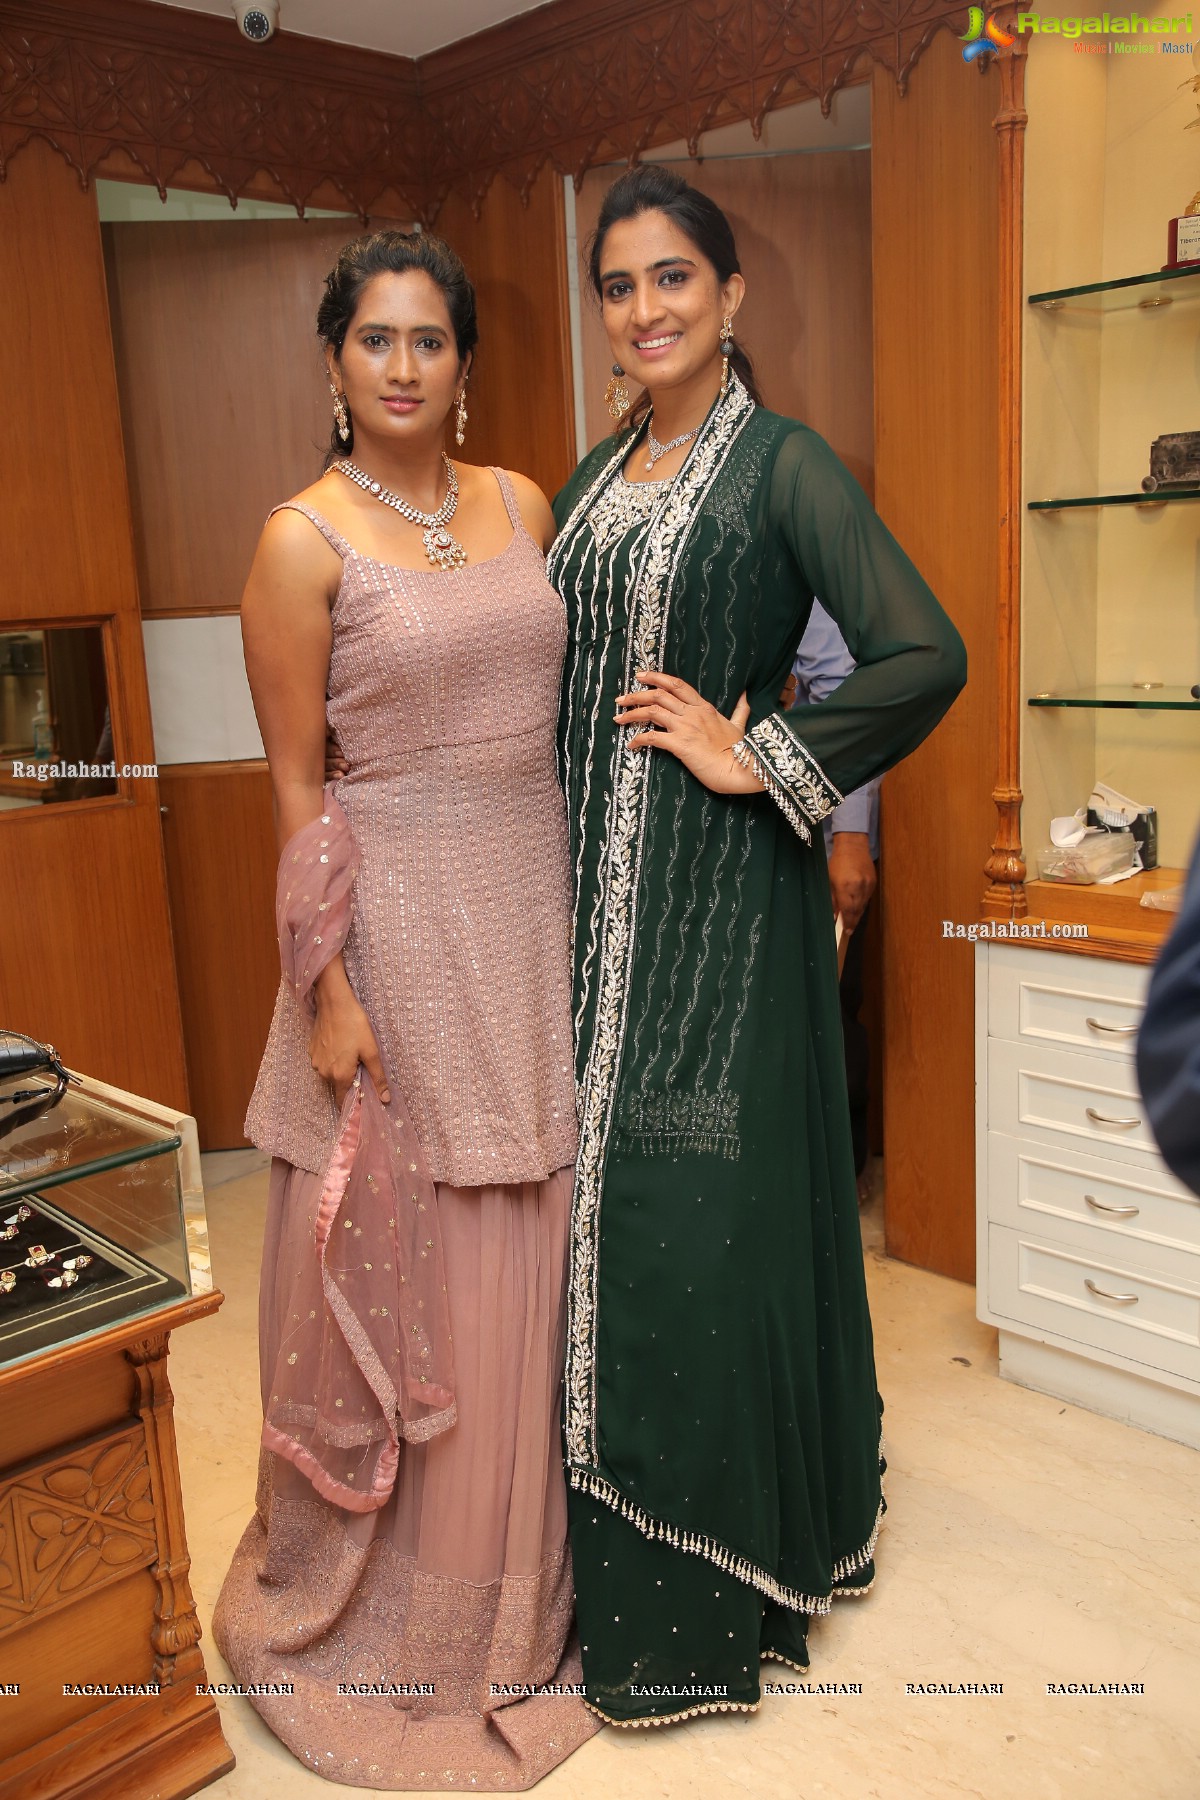 Tibarumal Jewellers Launches Exquisite Bridal Jewellery at the 100 years Anniversary Celebrations